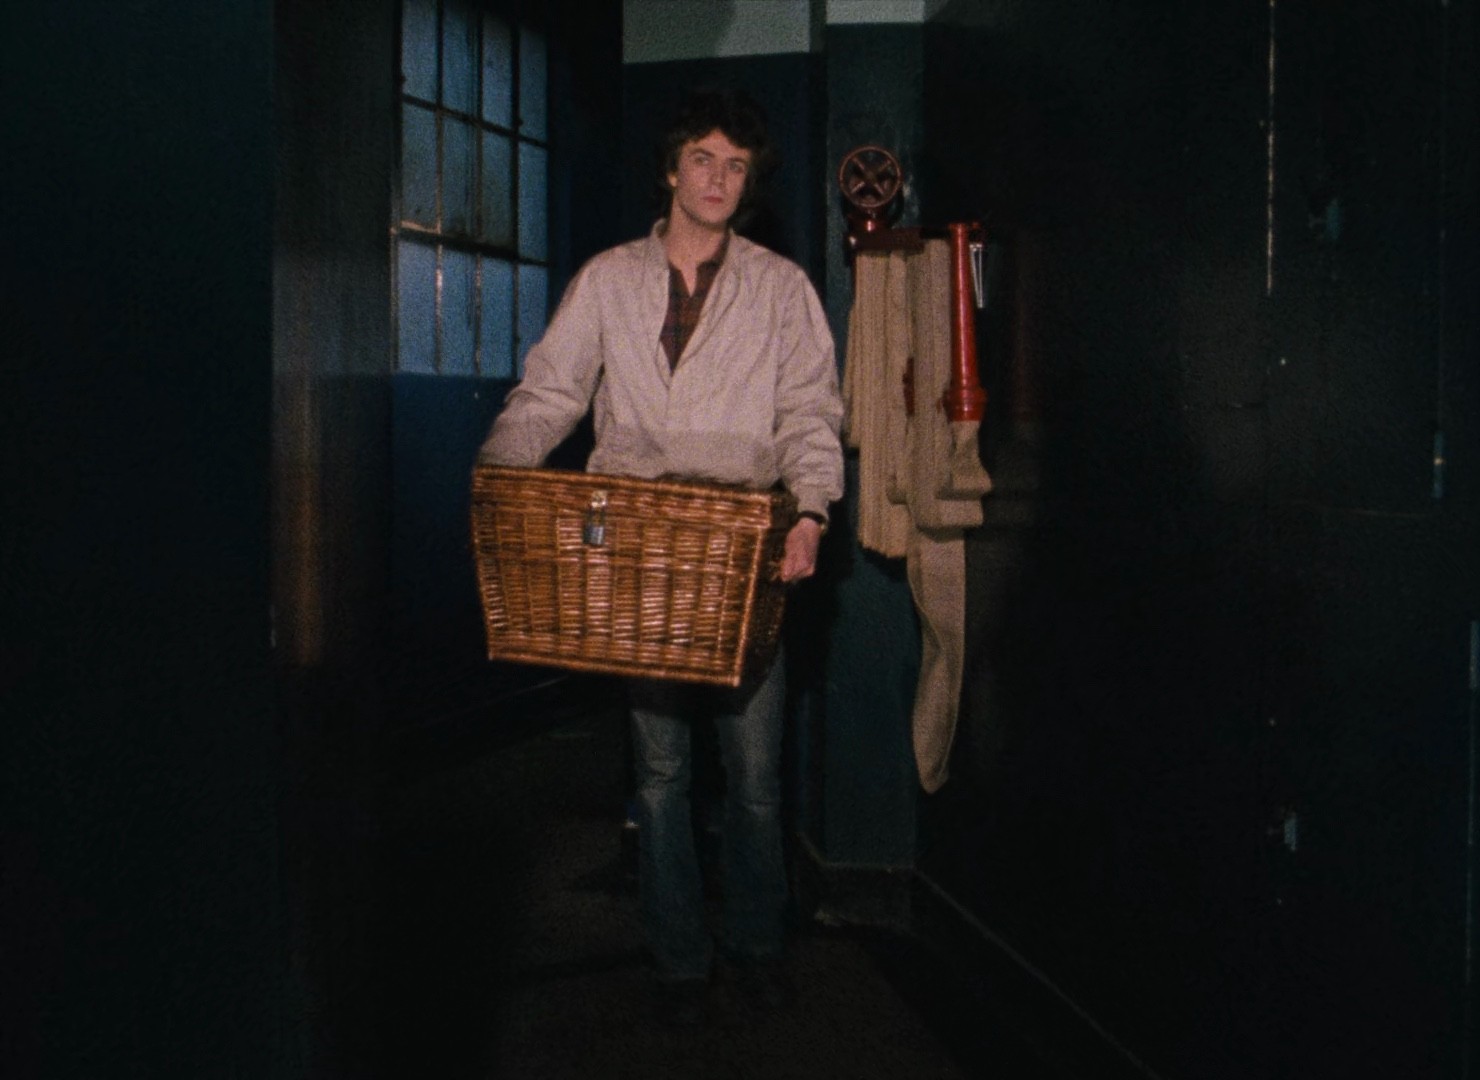 Basket Case 1982 Arrow Remastered 1080p BluRay x265 HEVC 10bit AAC 1 0 commentary HeVK